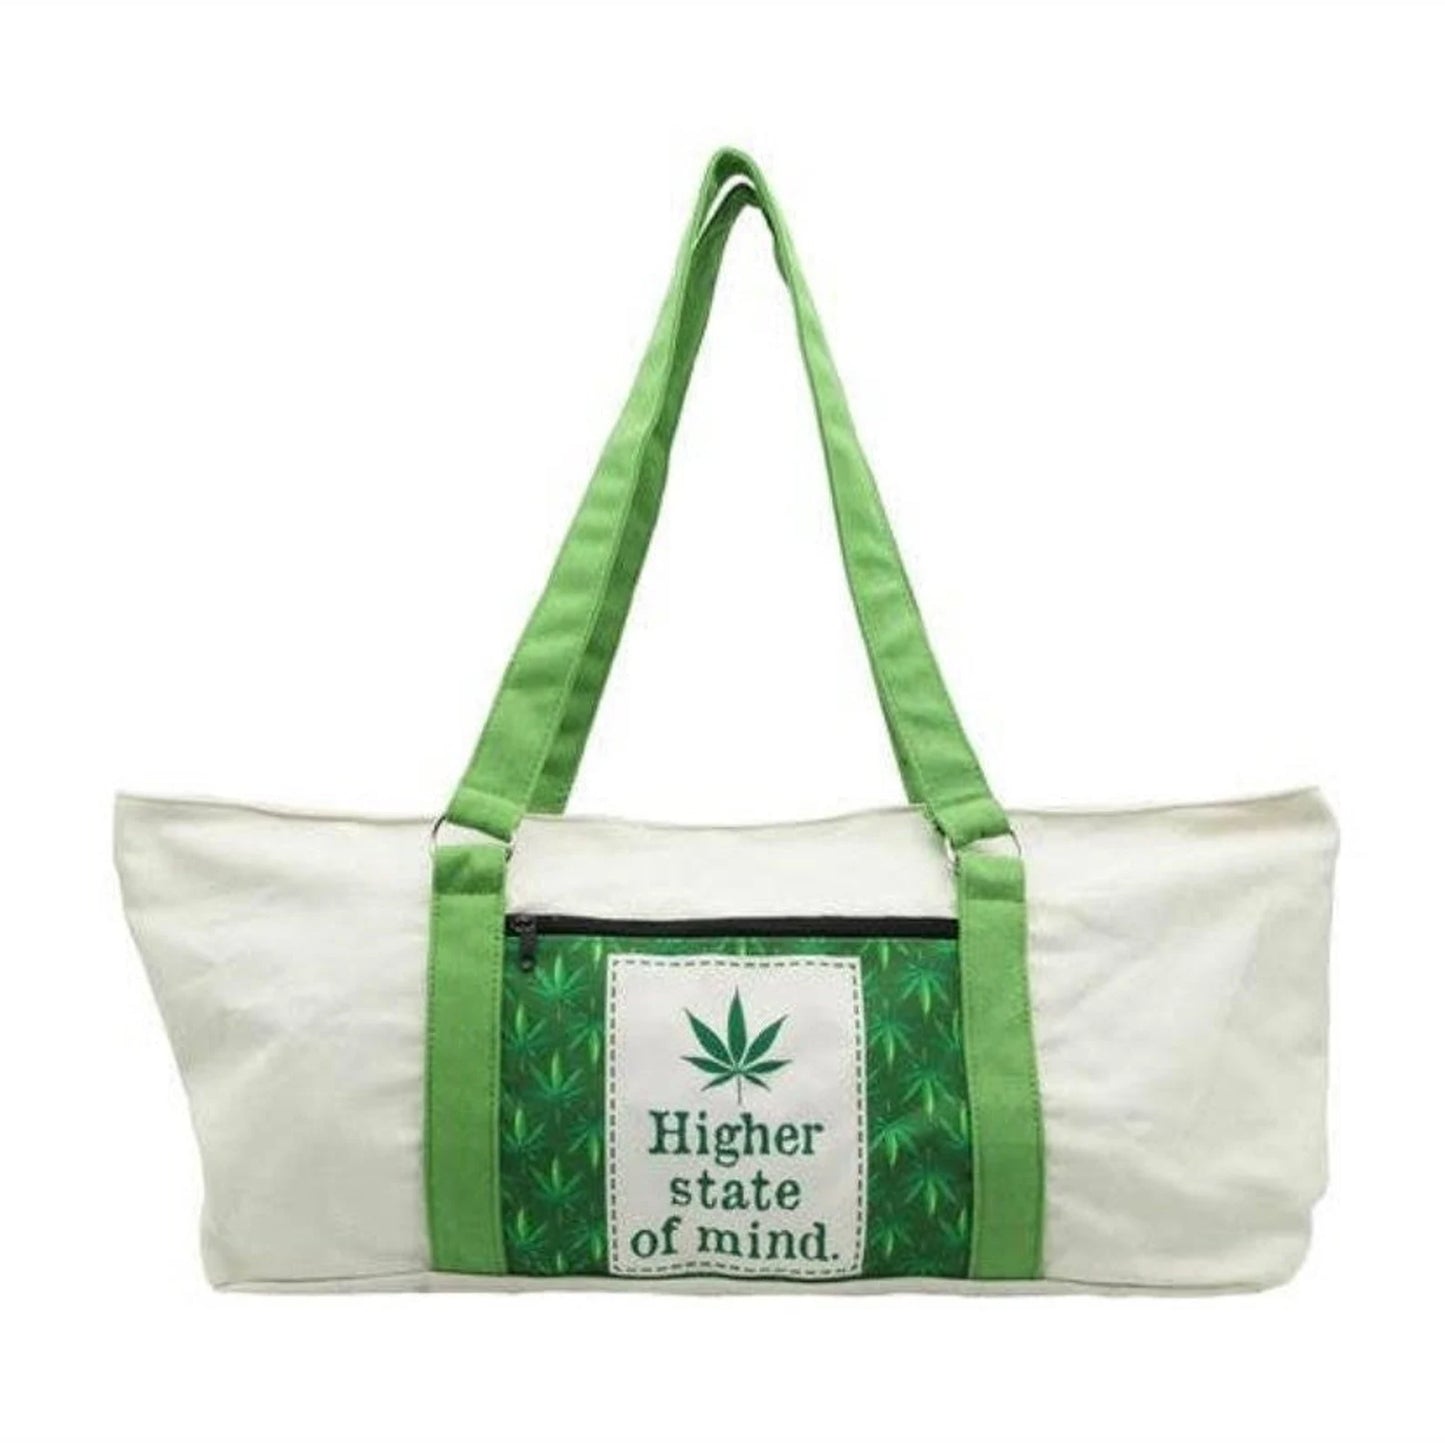 Canna - Higher State of Mind- Canvas Bag yoga smokes yoga studio, delivery, delivery near me, yoga smokes smoke shop, find smoke shop, head shop near me, yoga studio, headshop, head shop, local smoke shop, psl, psl smoke shop, smoke shop, smokeshop, yoga, yoga studio, dispensary, local dispensary, smokeshop near me, port saint lucie, florida, port st lucie, lounge, life, highlife, love, stoned, highsociety. Yoga Smokes